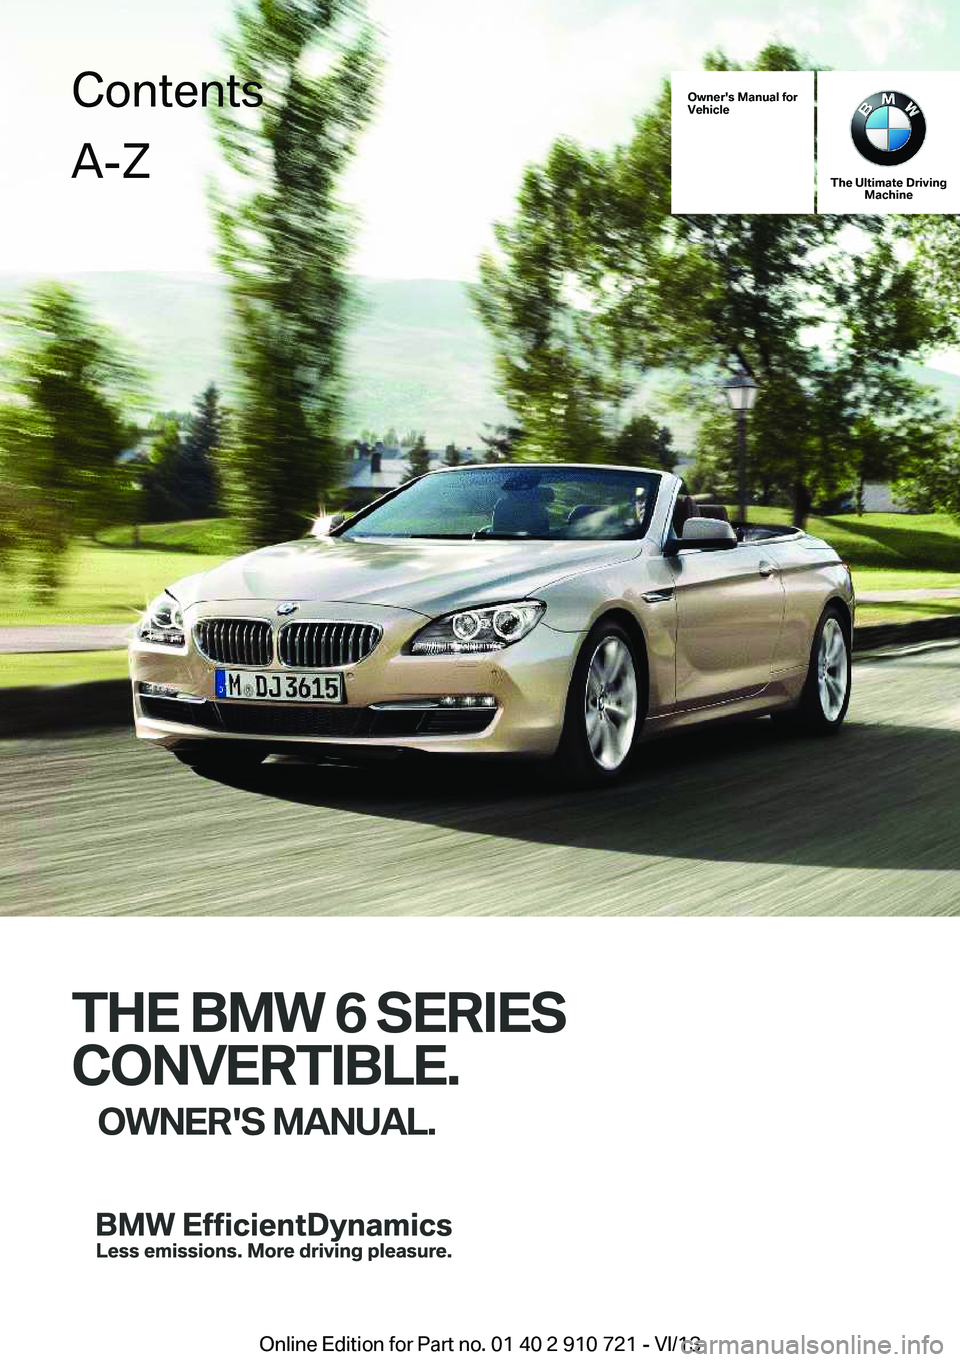 BMW 640I CONVERTIBLE 2014  Owners Manual Owner's Manual forVehicle
The Ultimate DrivingMachine
THE BMW 6 SERIES
CONVERTIBLE.
OWNER'S MANUAL.
ContentsA-Z
Online Edition for Part no. 01 40 2 910 721 - VI/13   